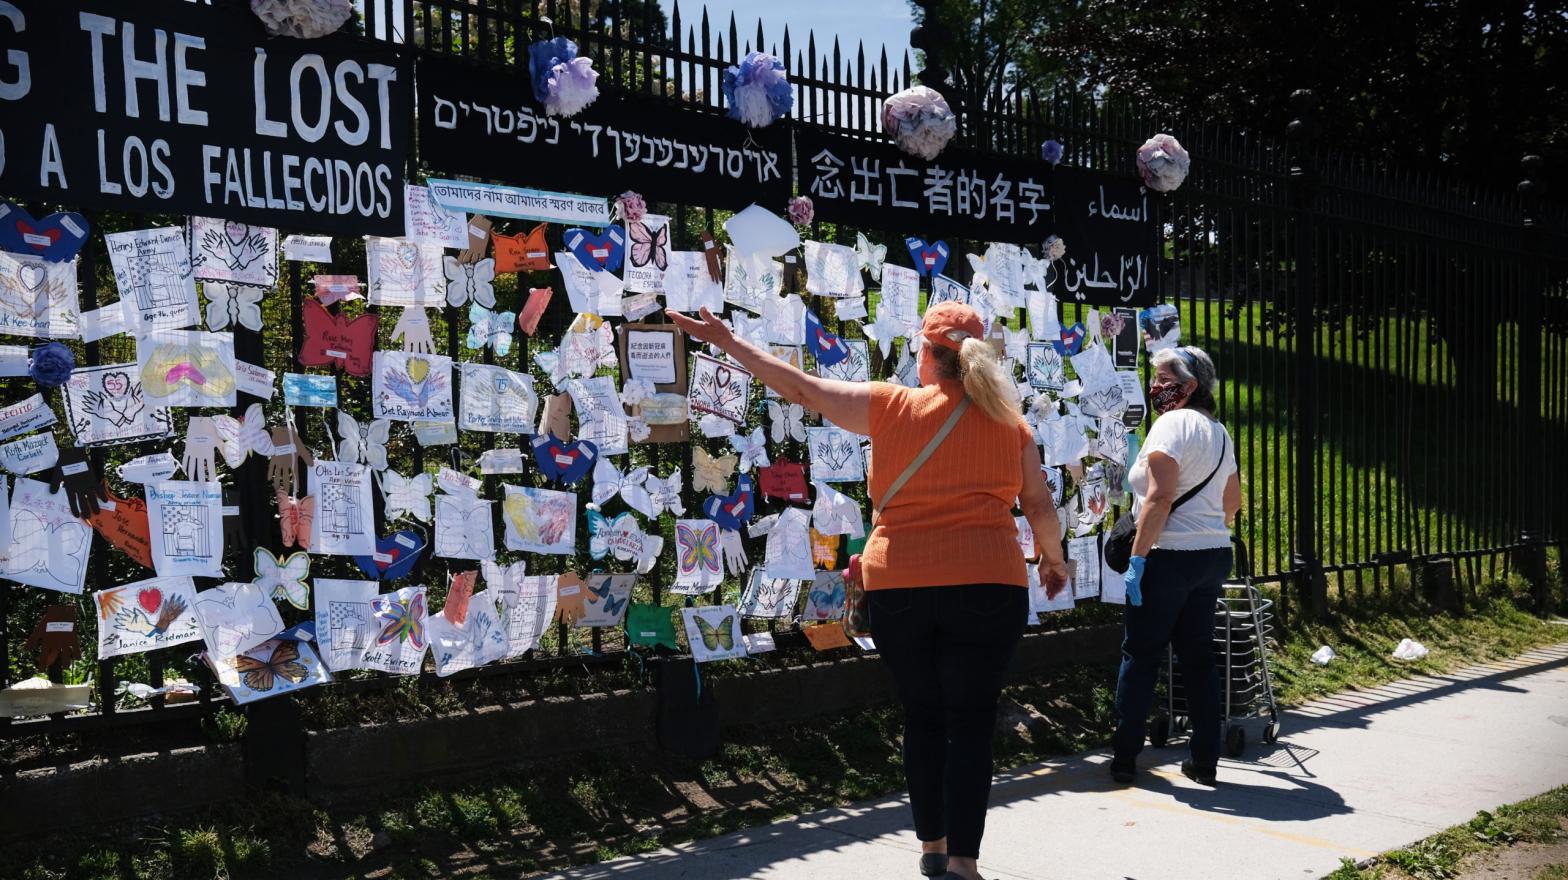 People walk by a memorial for those who have died from the coronavirus outside Green-Wood Cemetery on May 27, 2020. (Photo: Spencer Platt, Getty Images)